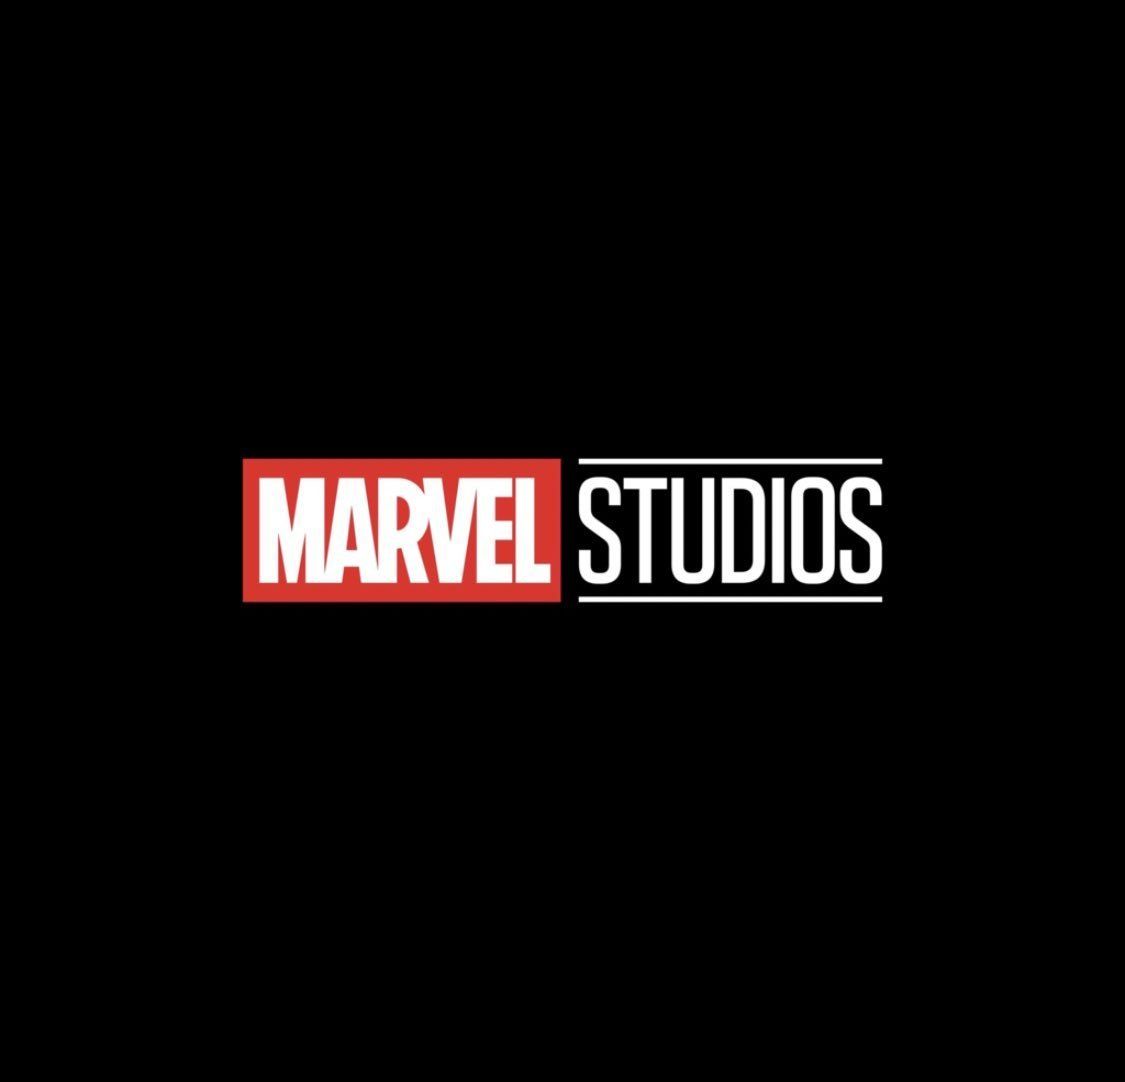 What’s next in MCU Phase 4? Kevin Feige drops hint